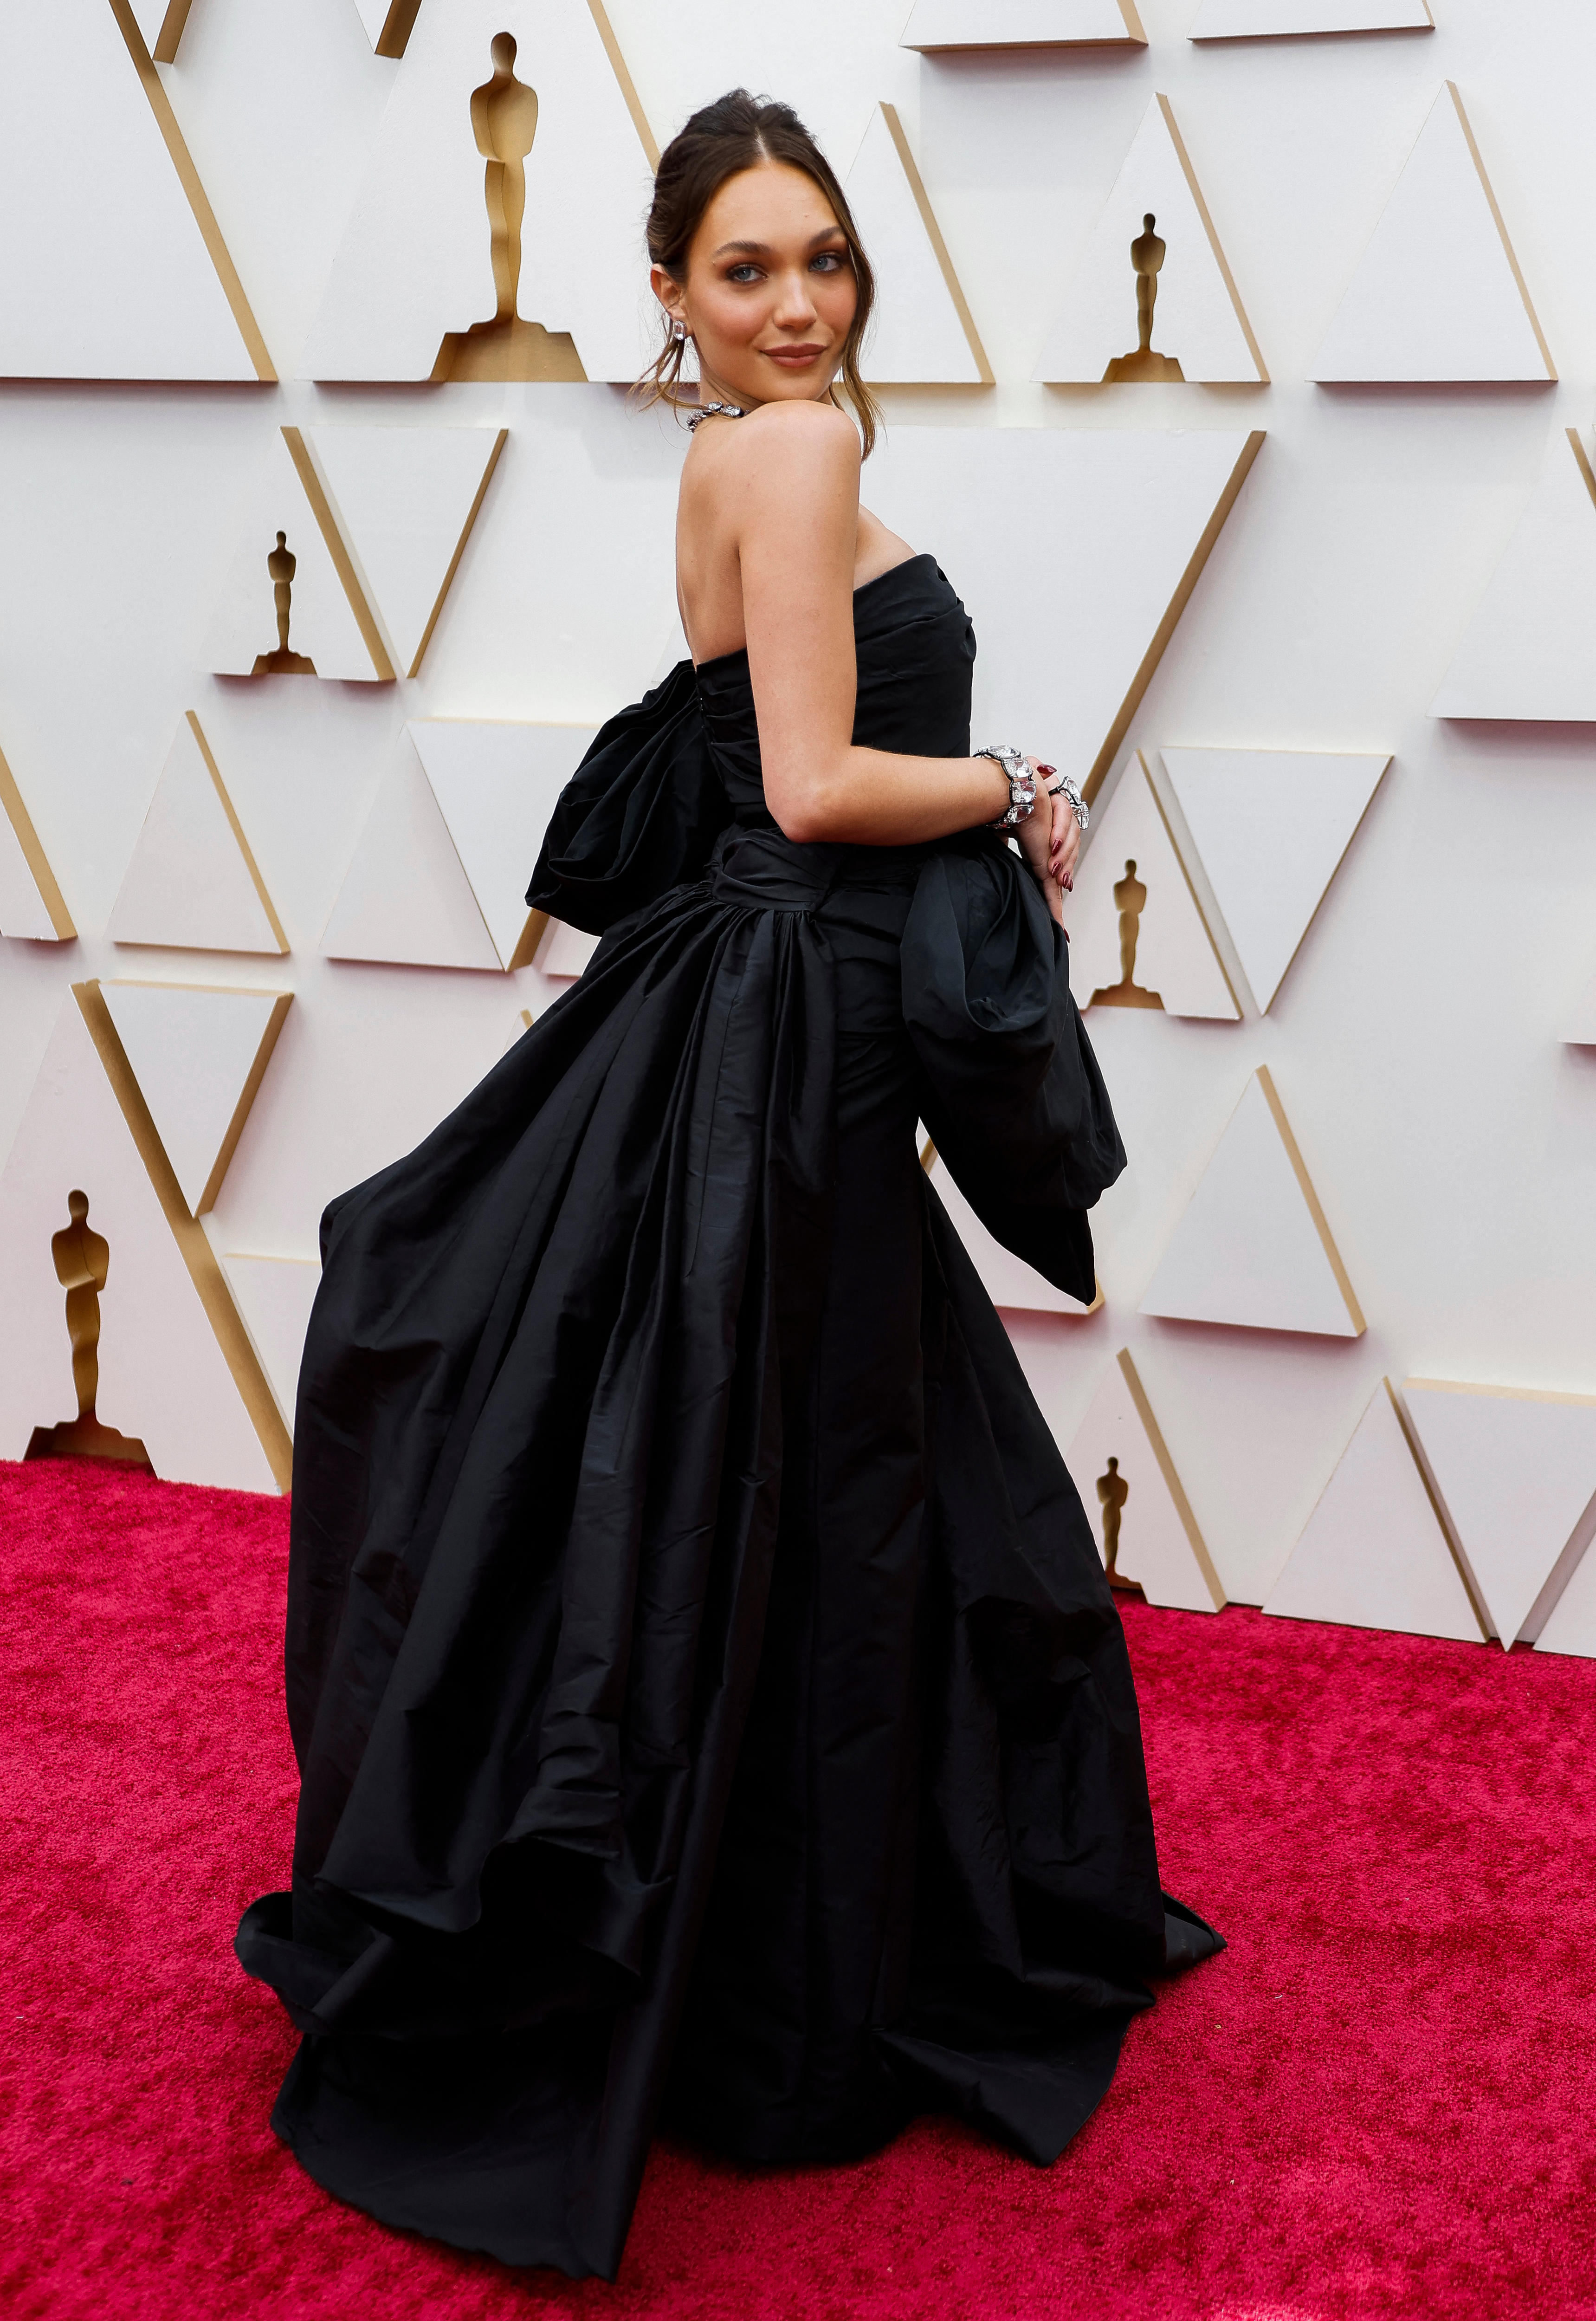 maddie ziegler poses on the oscars red carpet in a black billowing dress